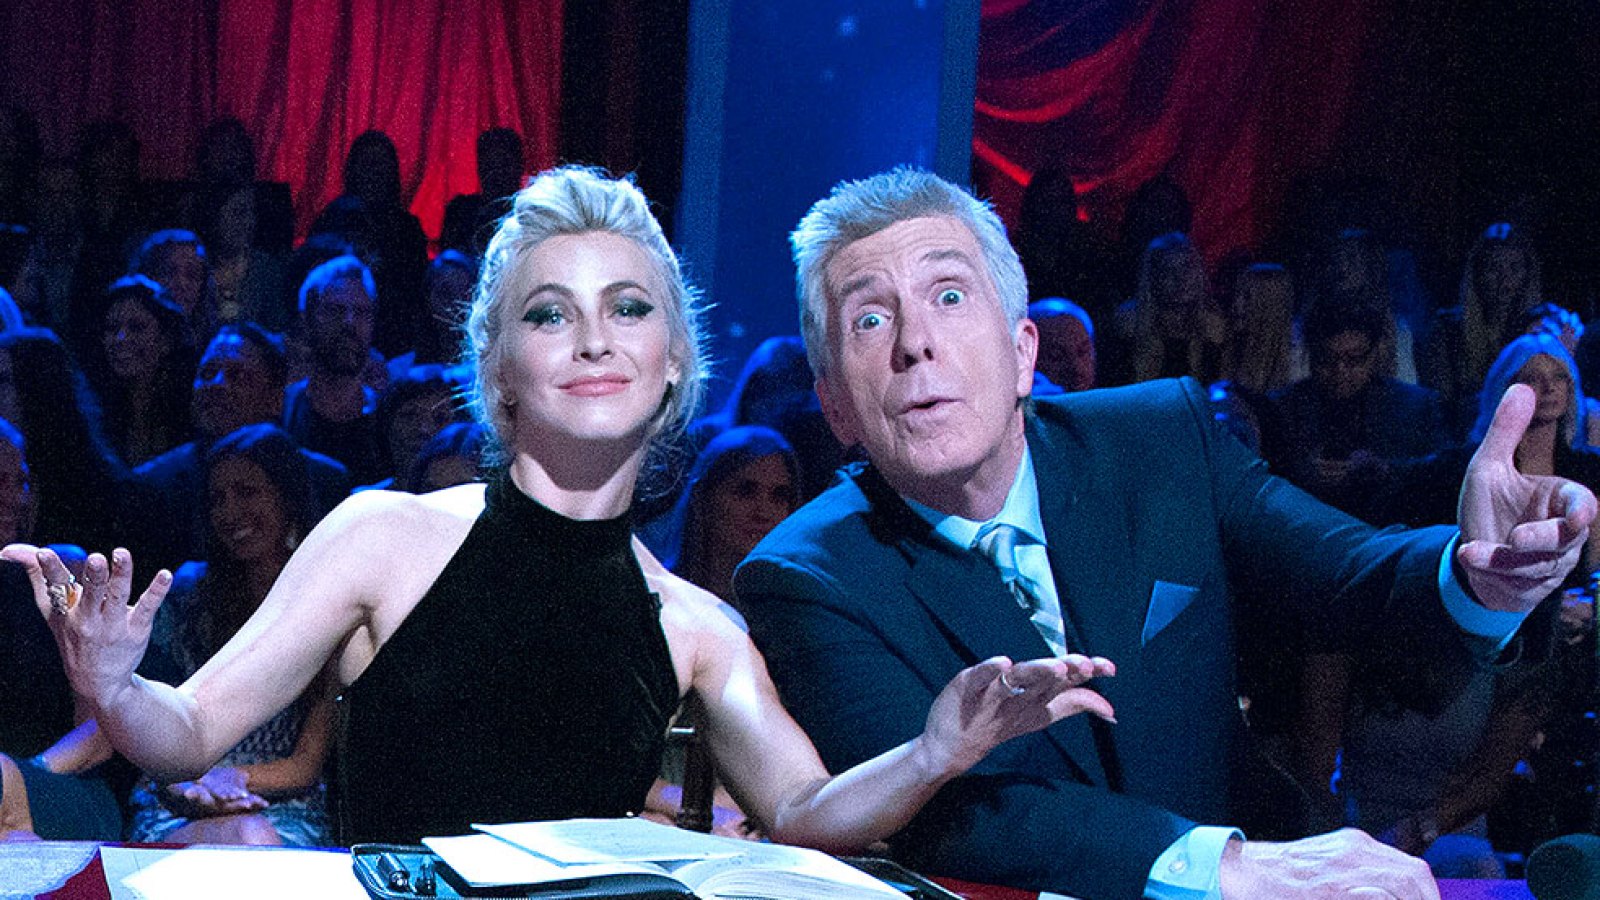 Julianne Hough and Tom Bergeron on Dancing With the Stars, Oct 24.